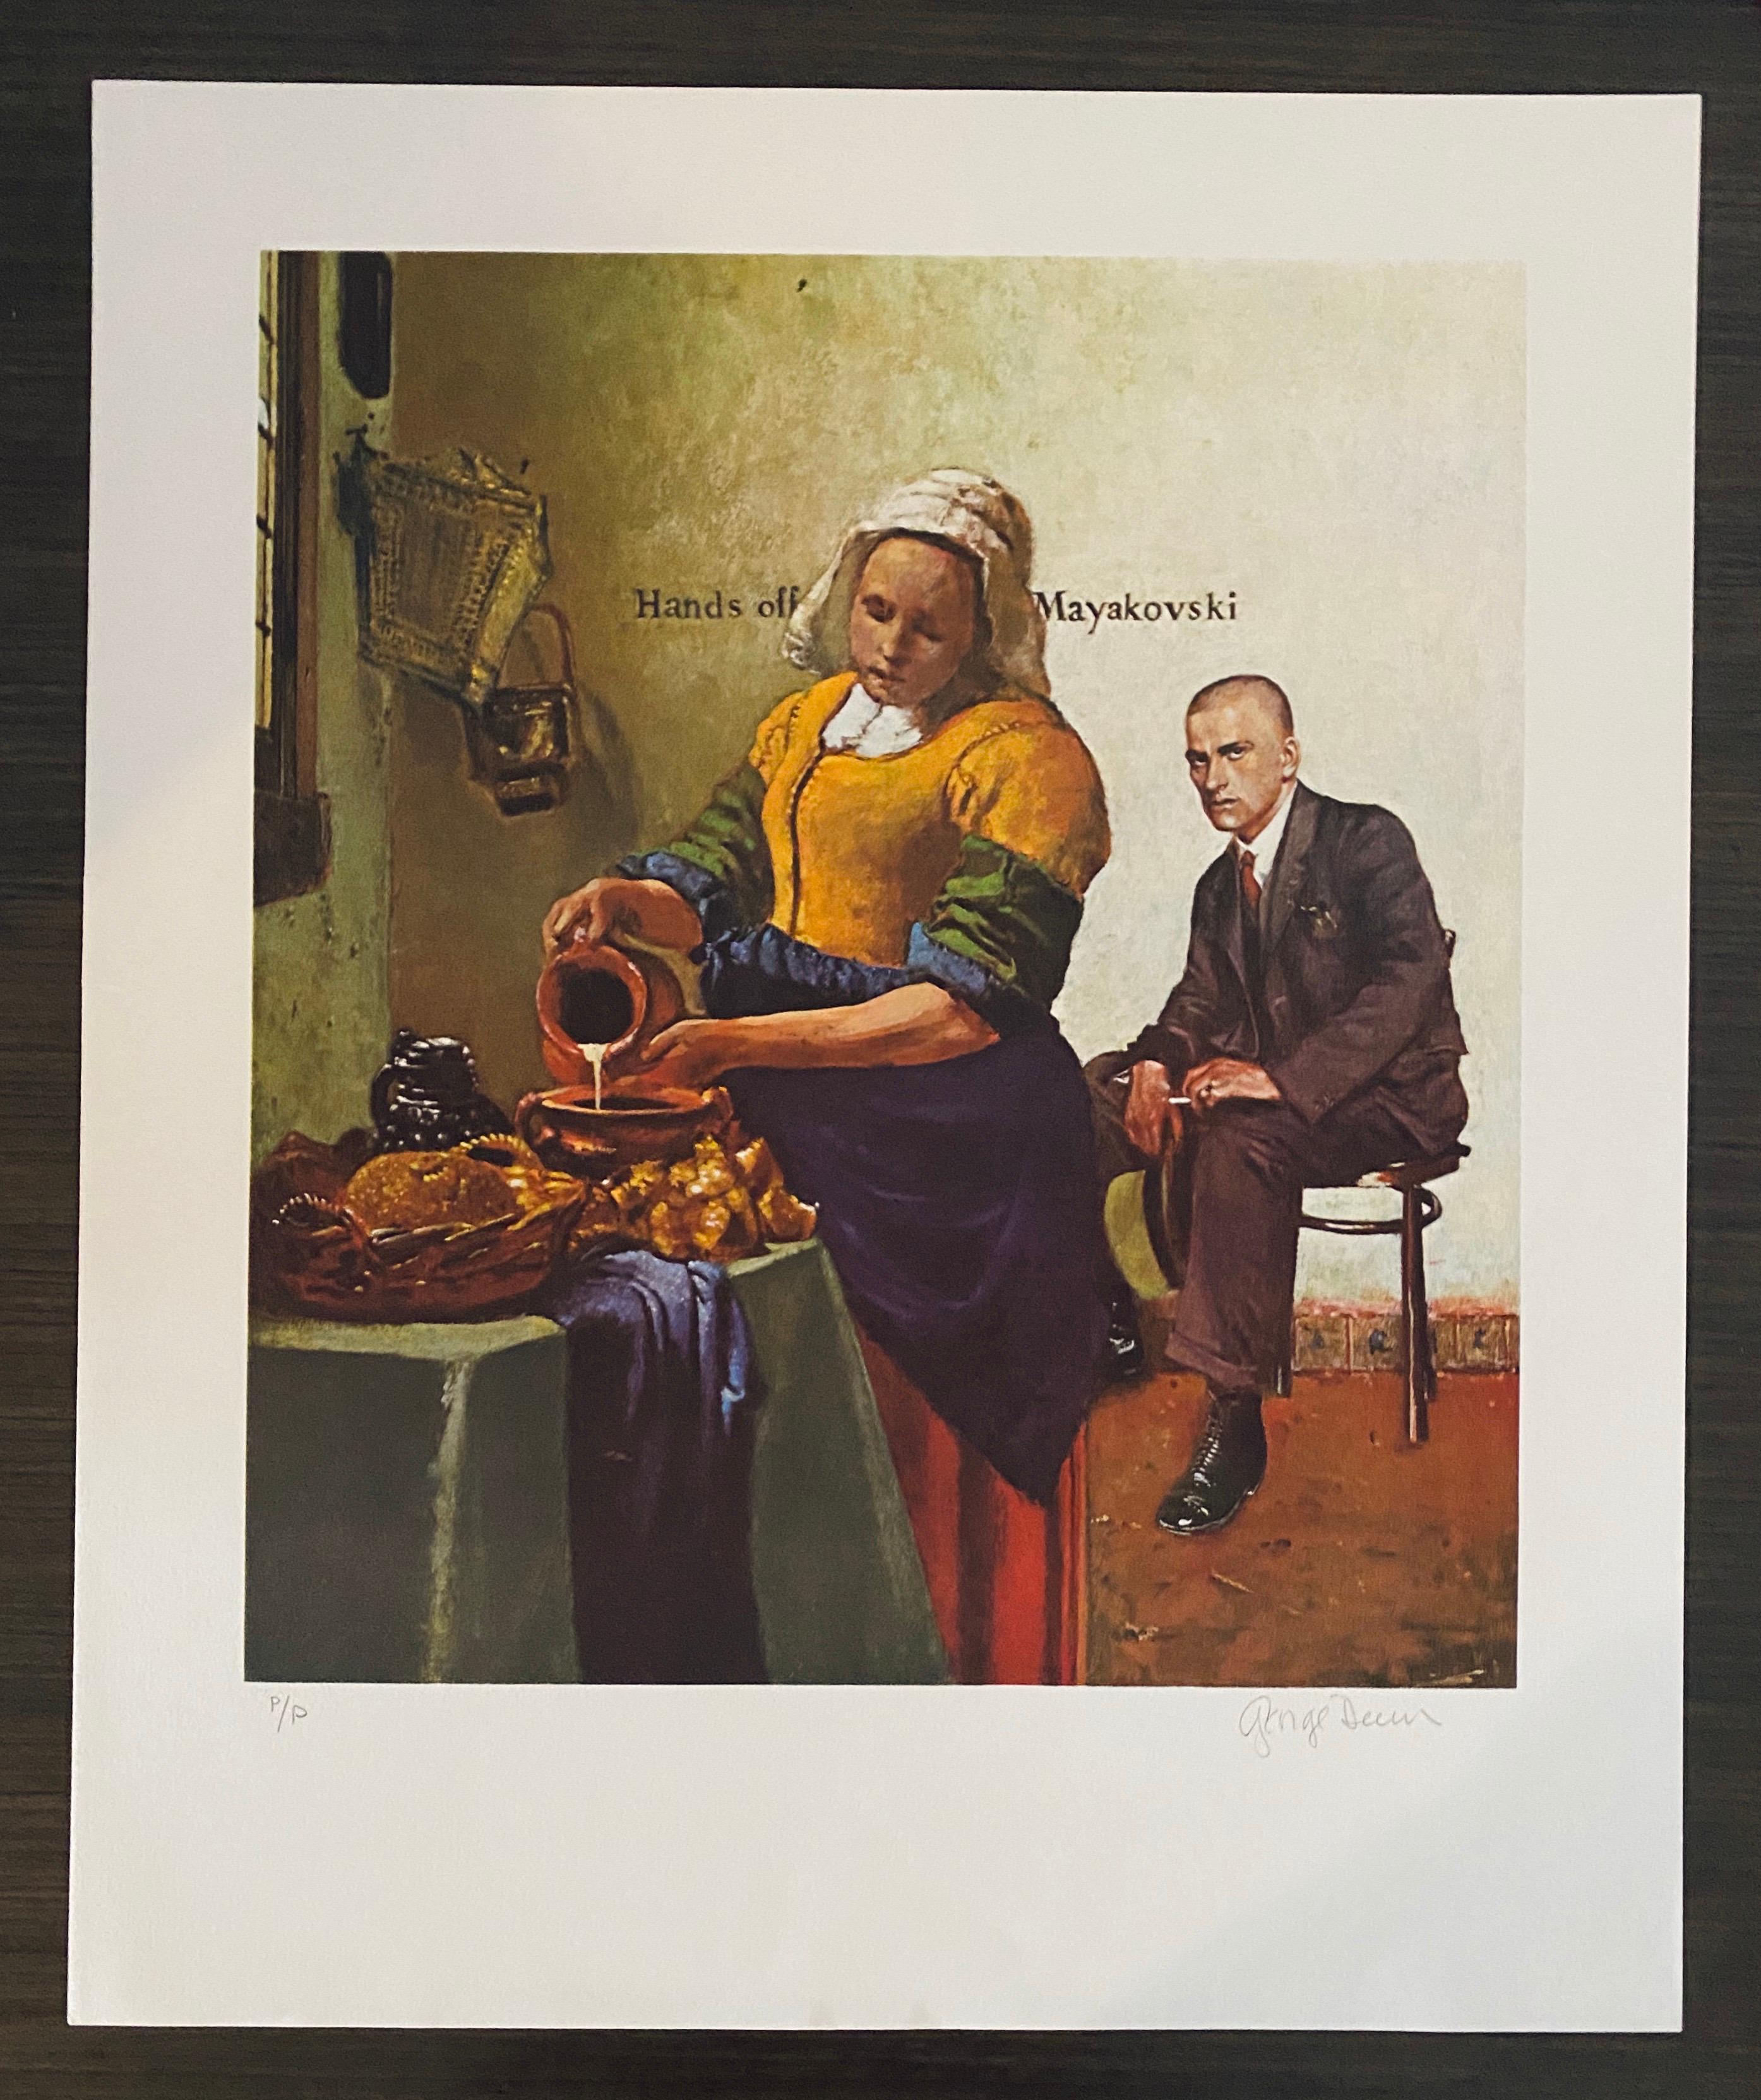 George Deem Figurative Print - American Artist Signed Color Lithograph Titled "Hands Off Mayakovsky"